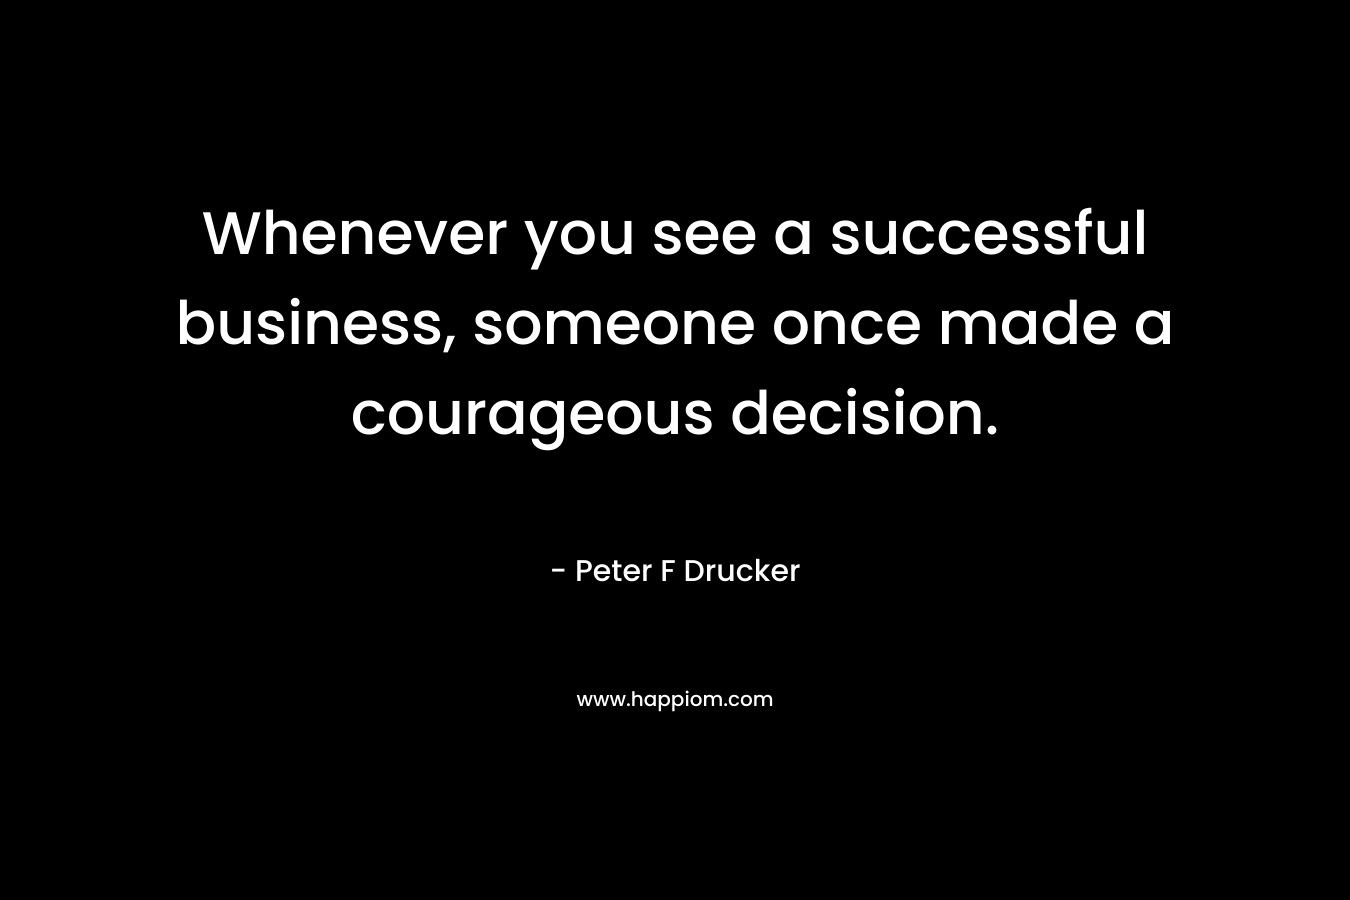 Whenever you see a successful business, someone once made a courageous decision.